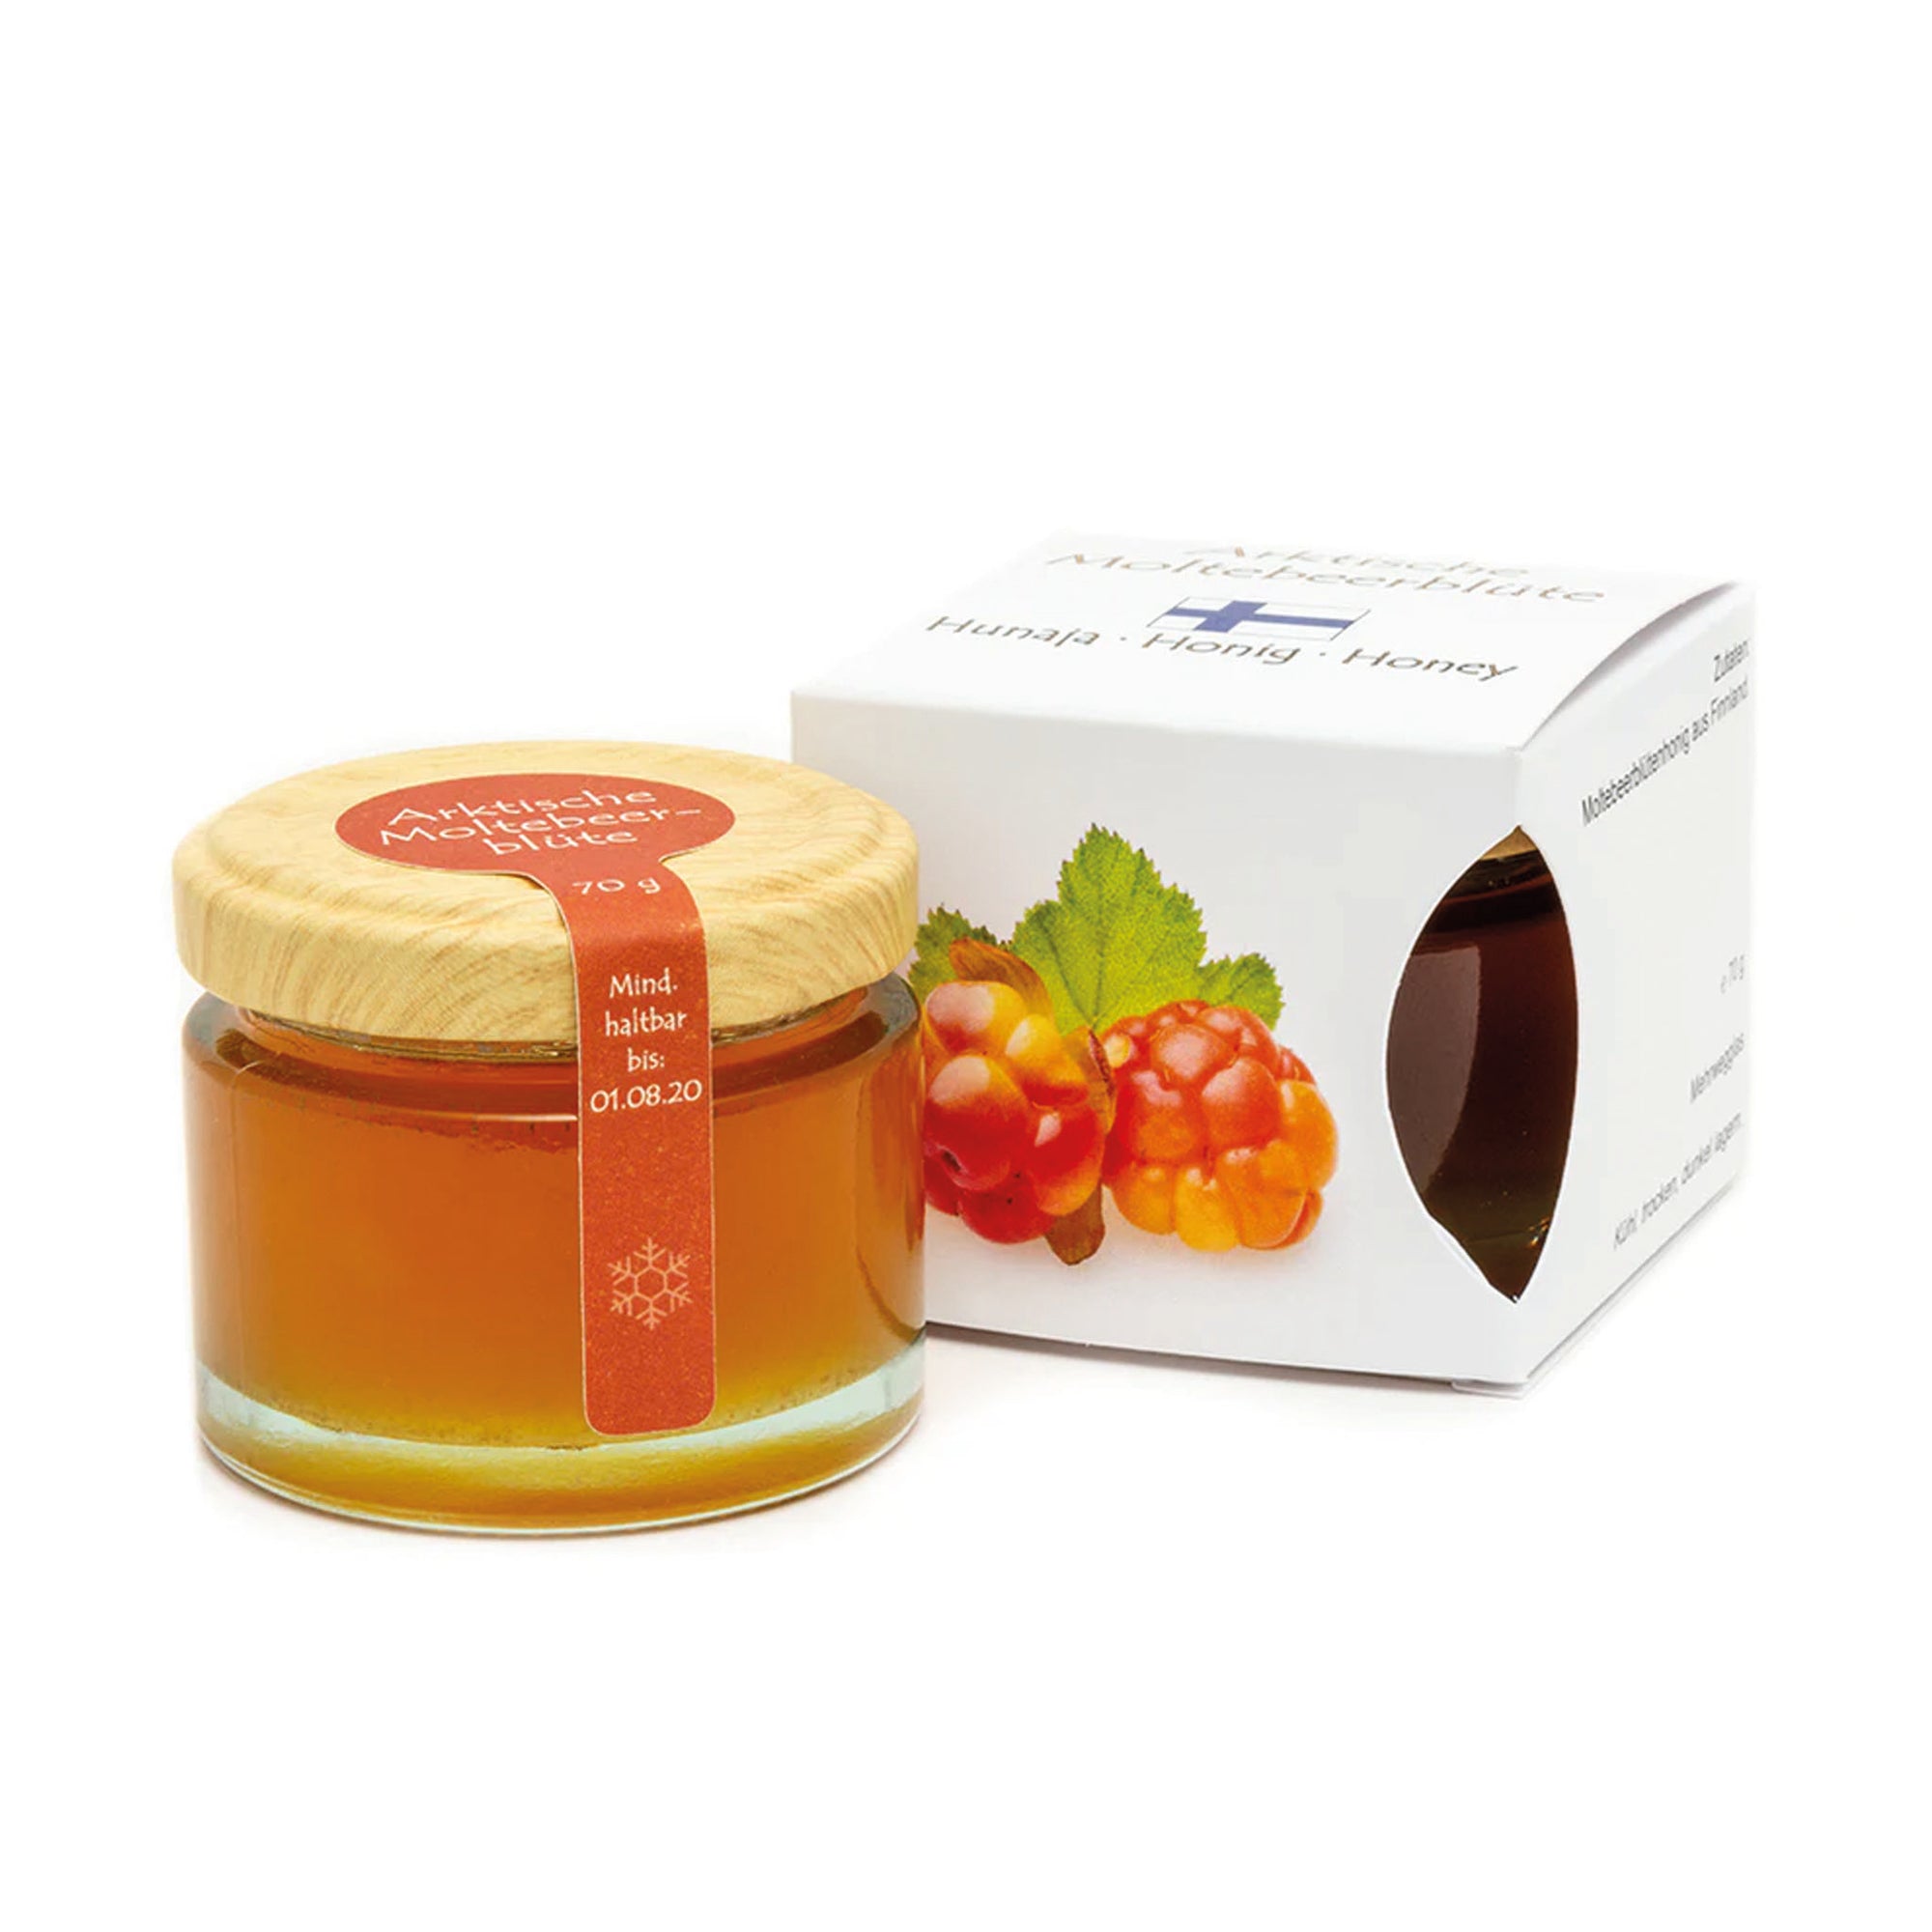 Arctic cloudberry blossom honey from southern Lapland